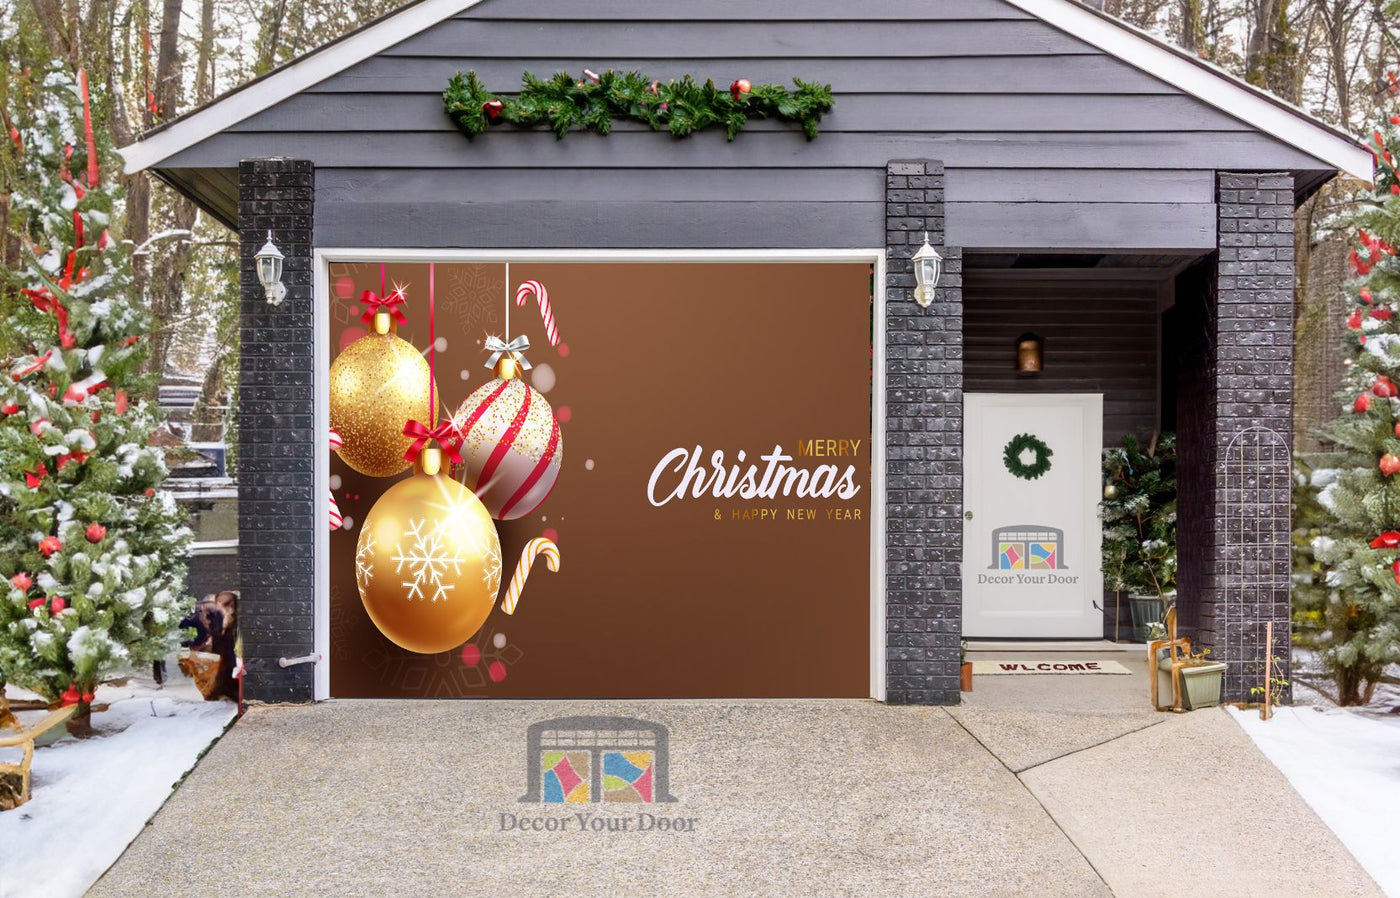 Merry Christmas Christmas In Glitter Gold Shiny Hanging Ornament Garage Door Wrap Cover Mural Decoration